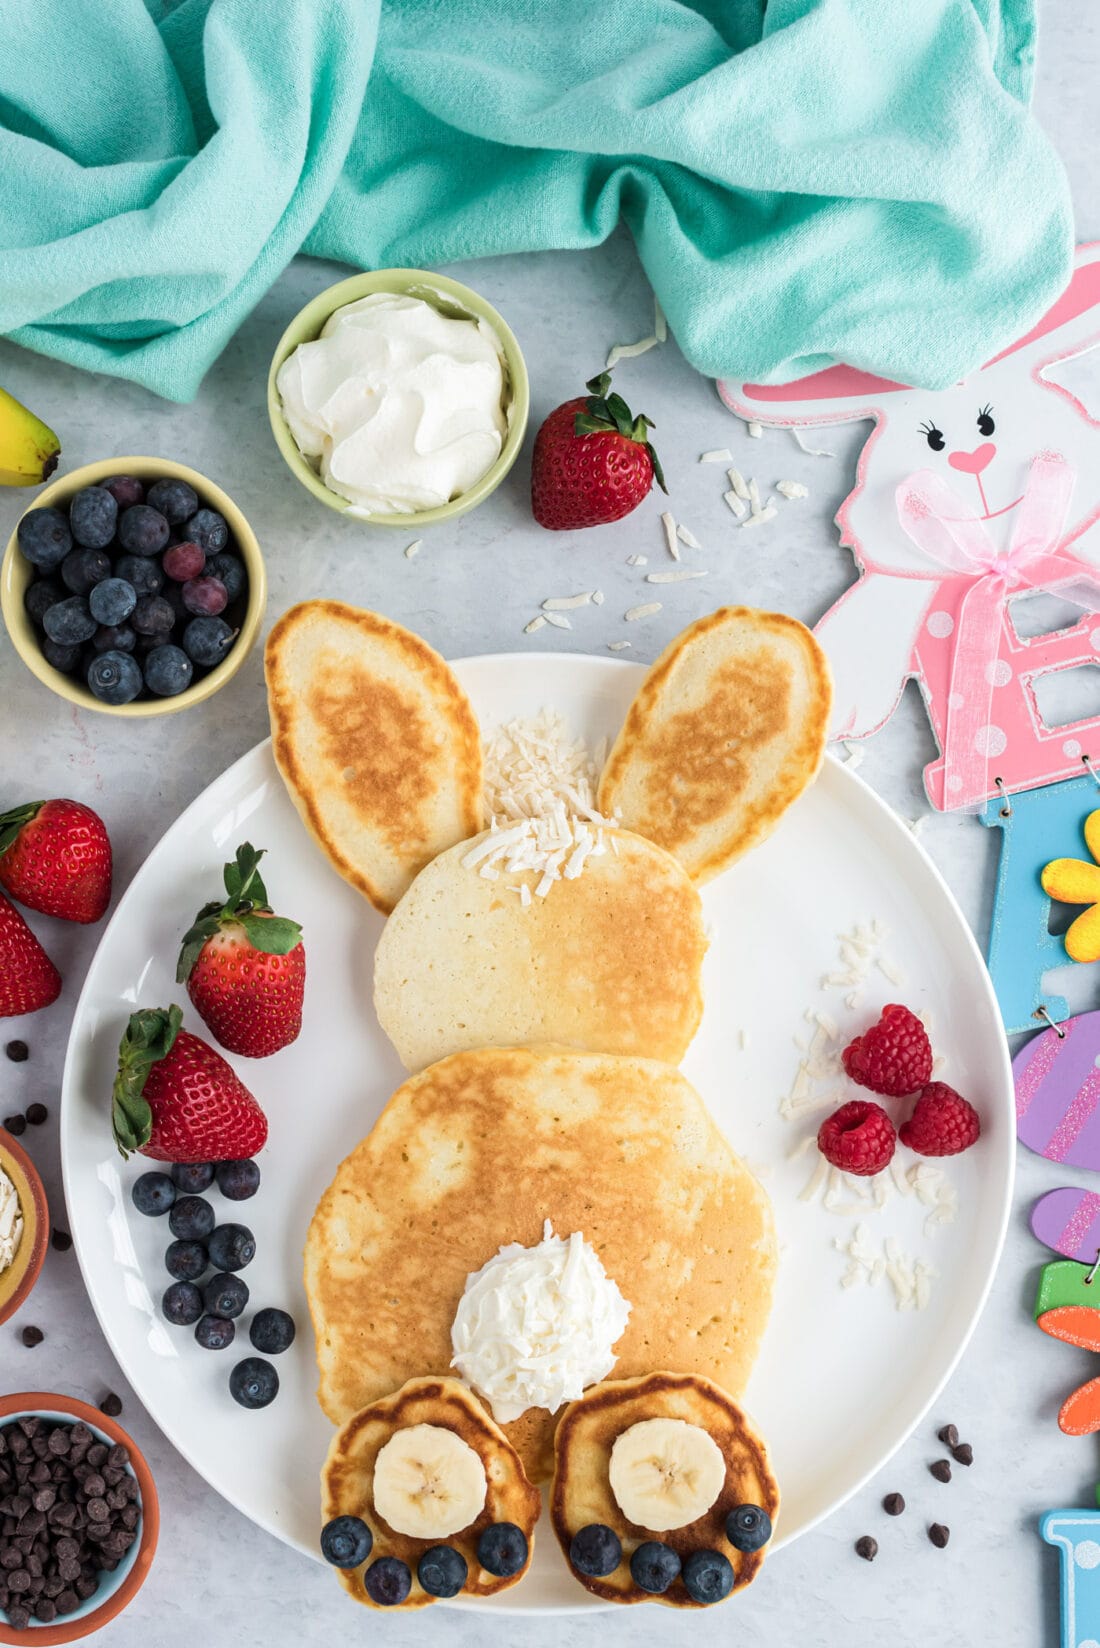 Bunny Butt Pancakes served with fruit